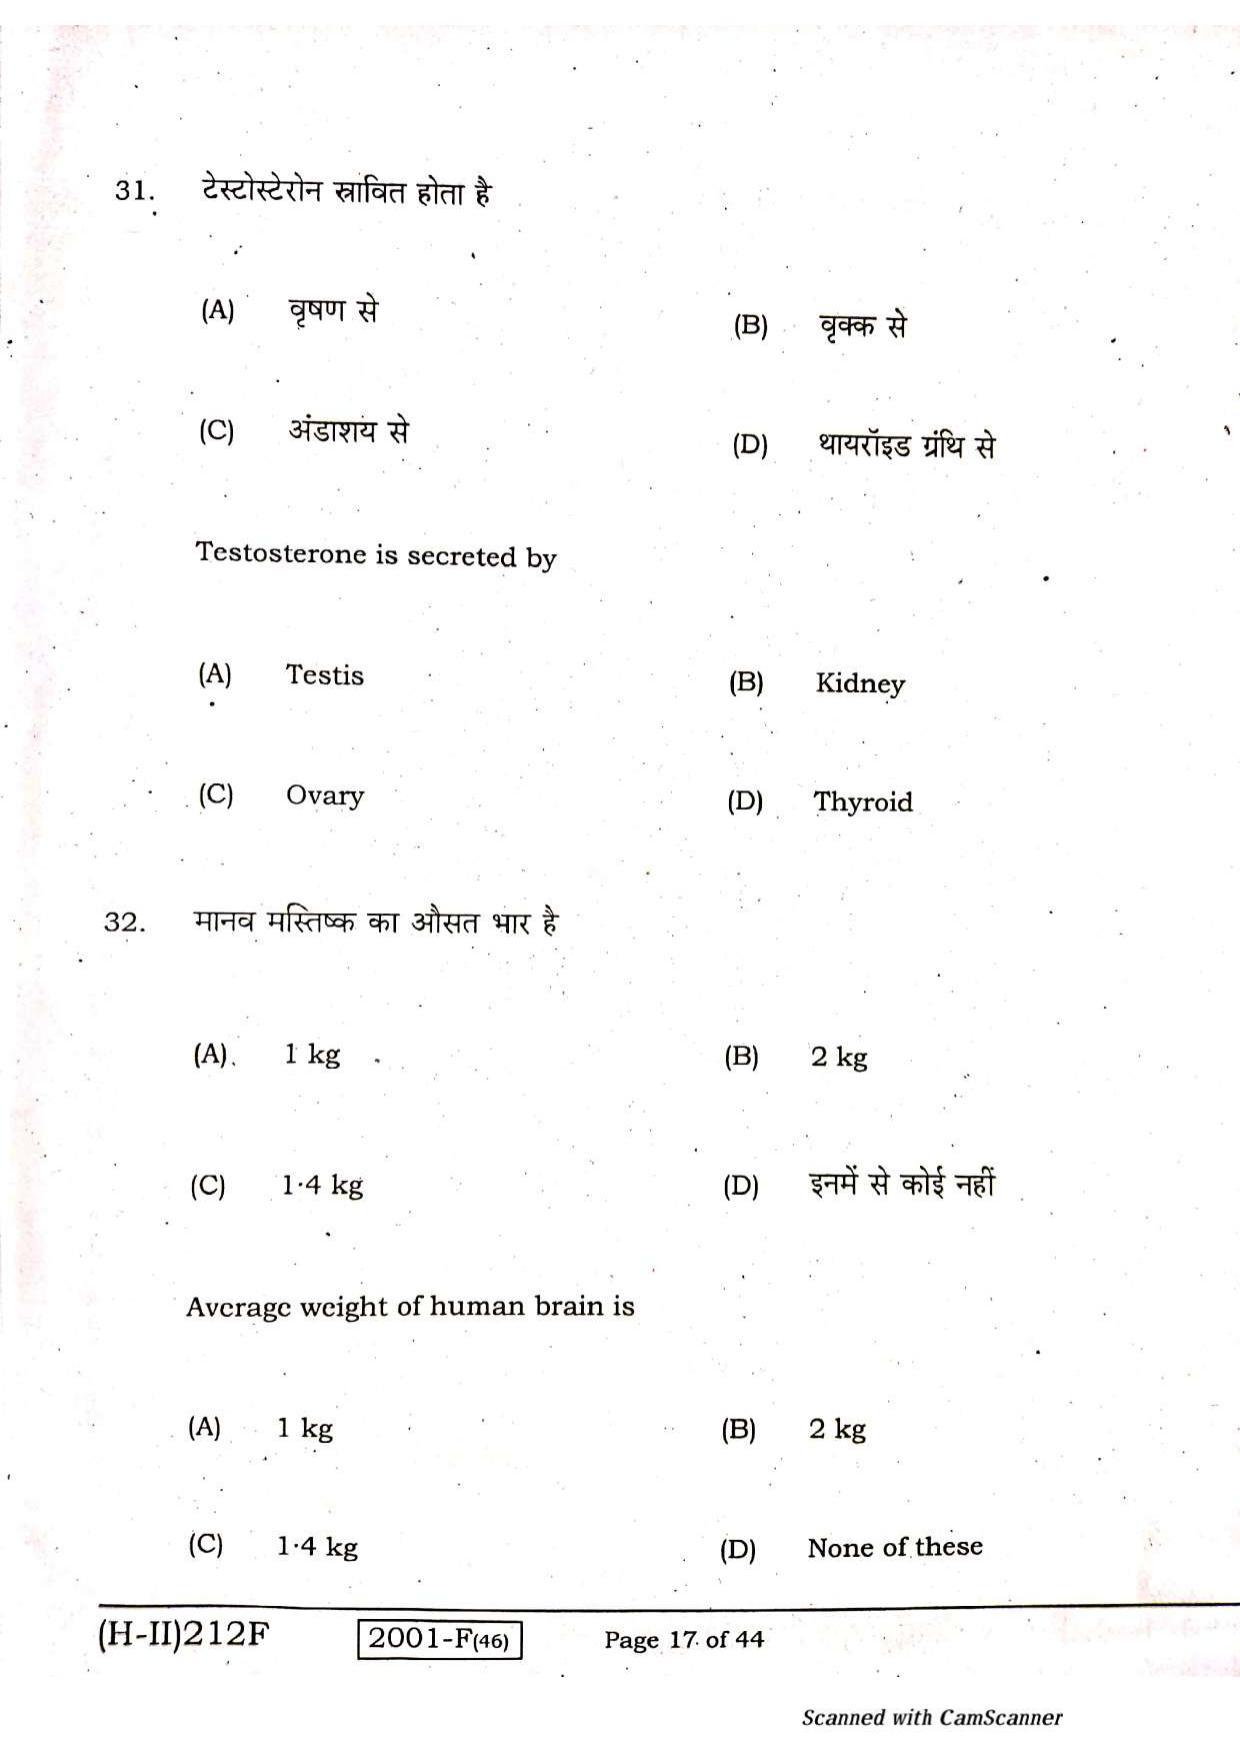 Bihar Board Class 10 Science 2021 (2nd Sitting) Question Paper - Page 15